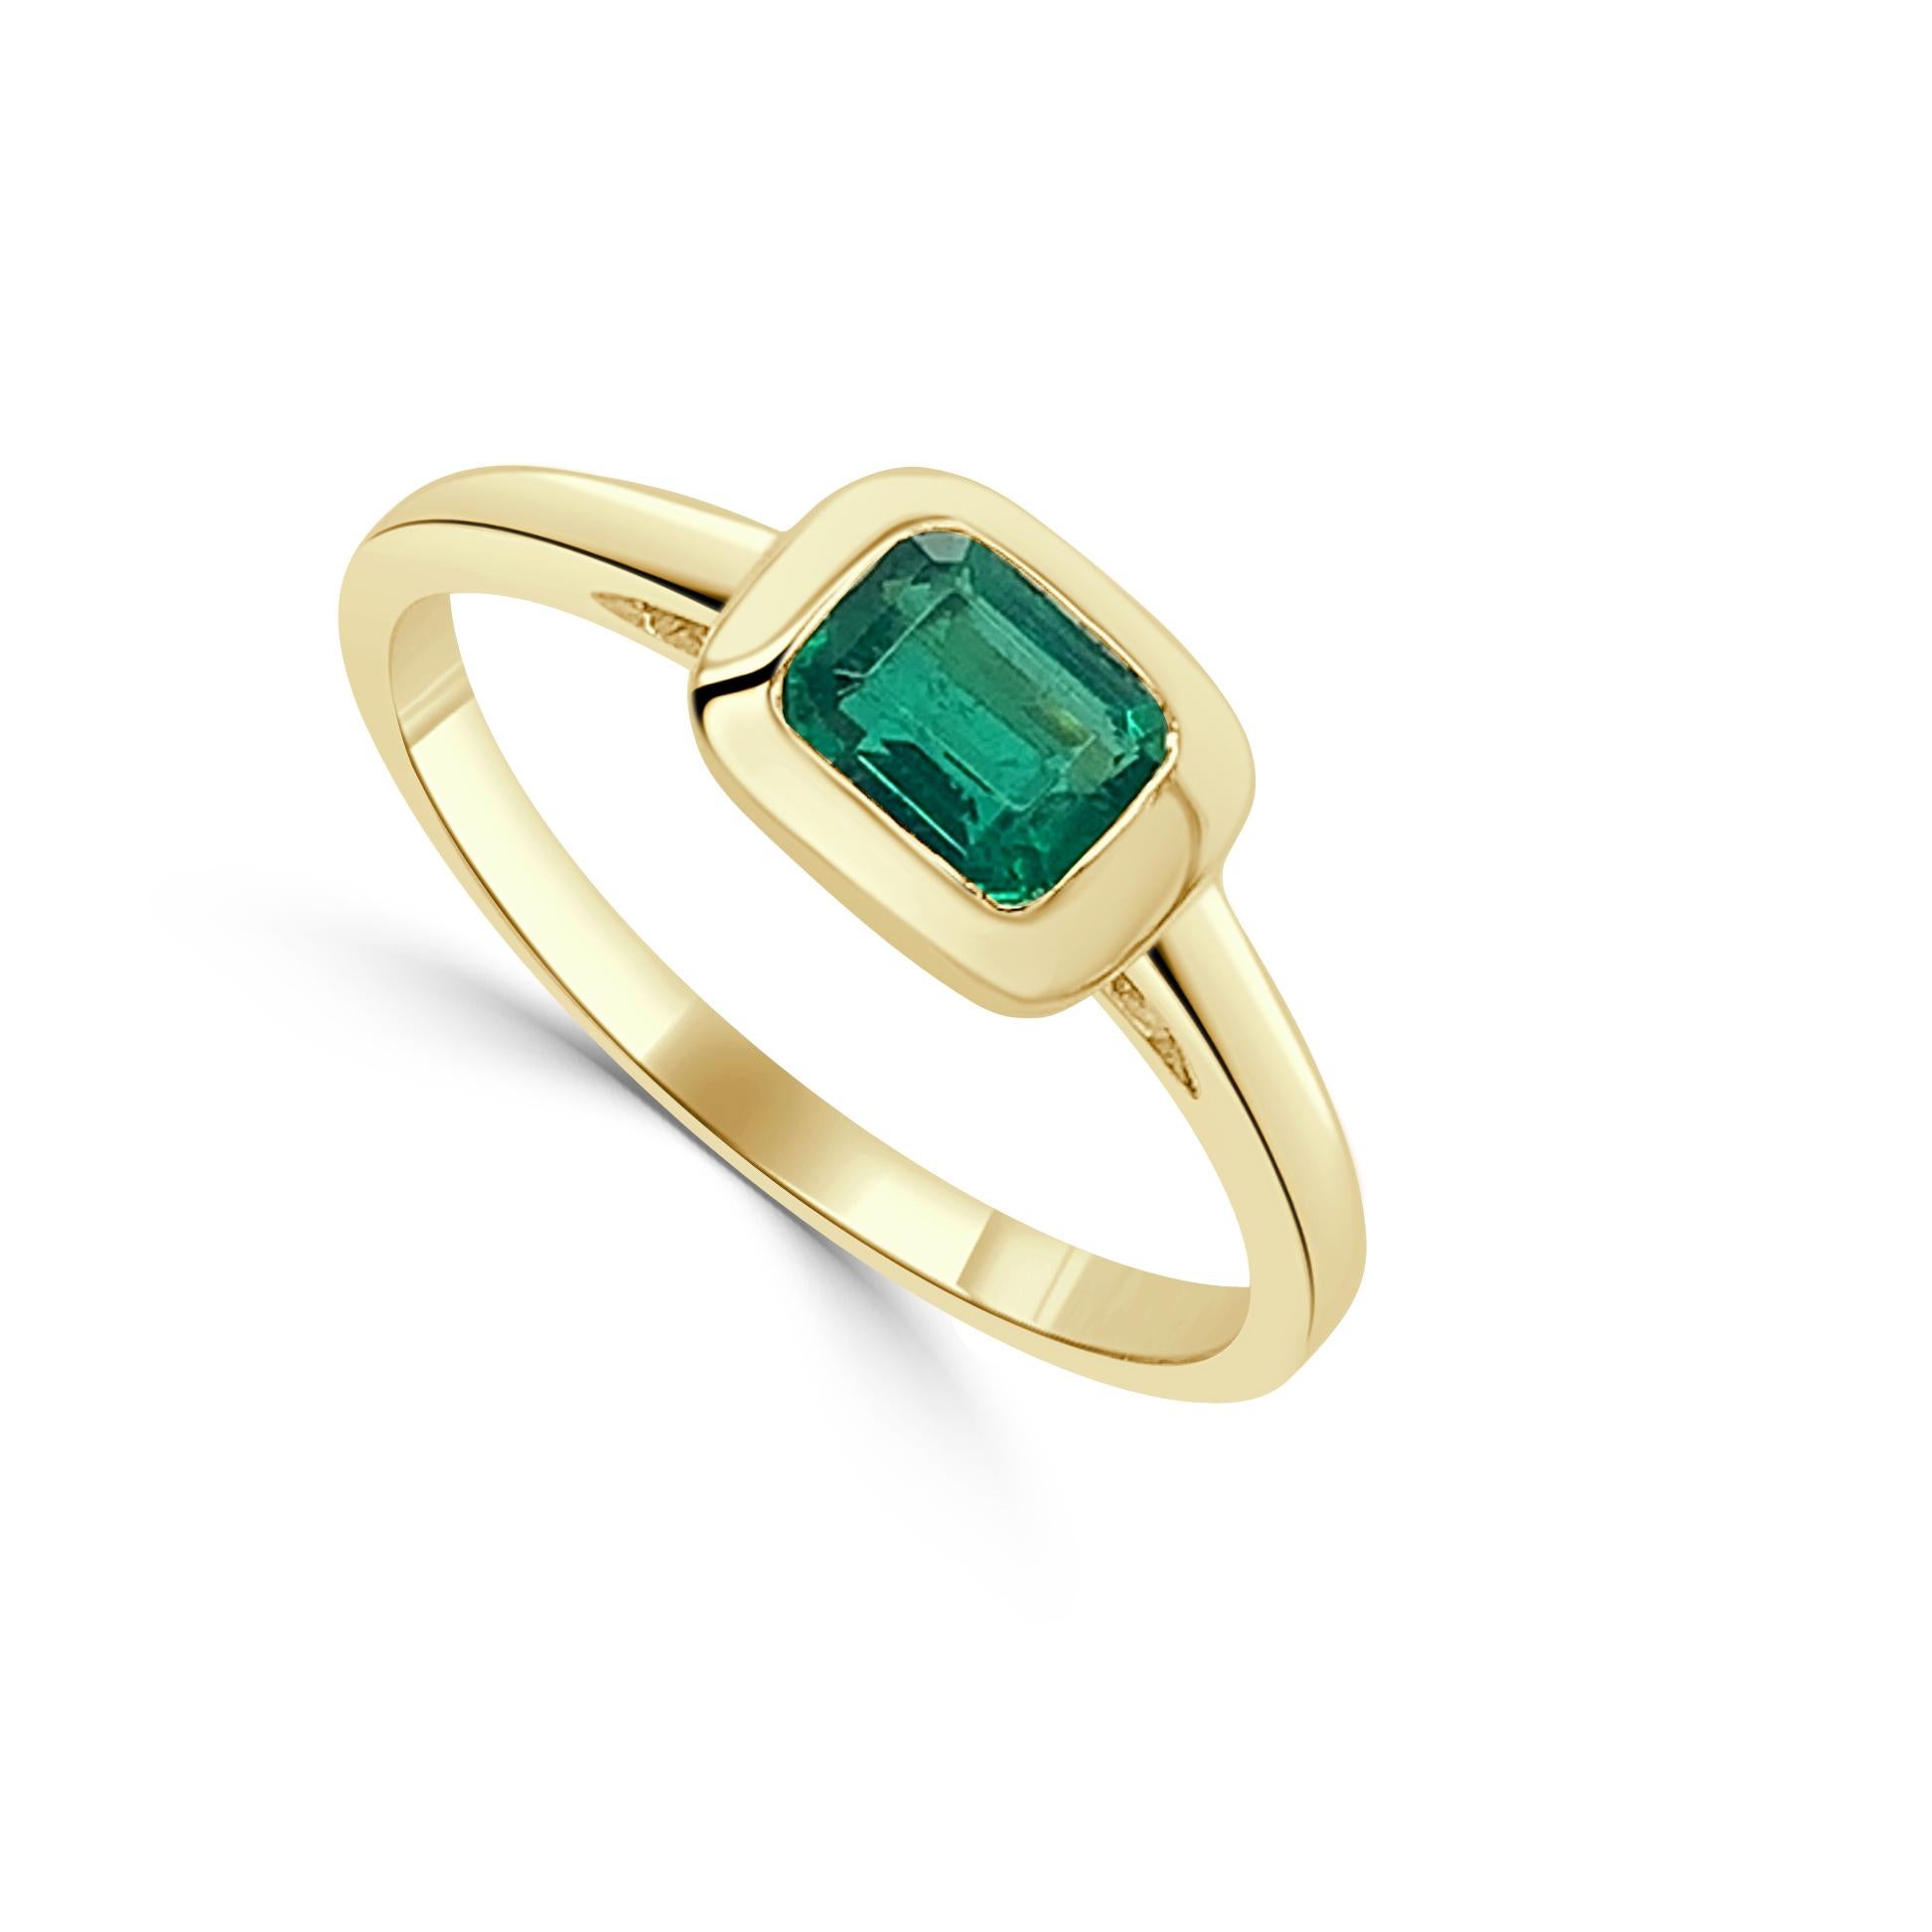 Contemporary 14k Gold & Emerald Ring 0.60 CTTW for Her, Emerald Cut Emerald for Ladies